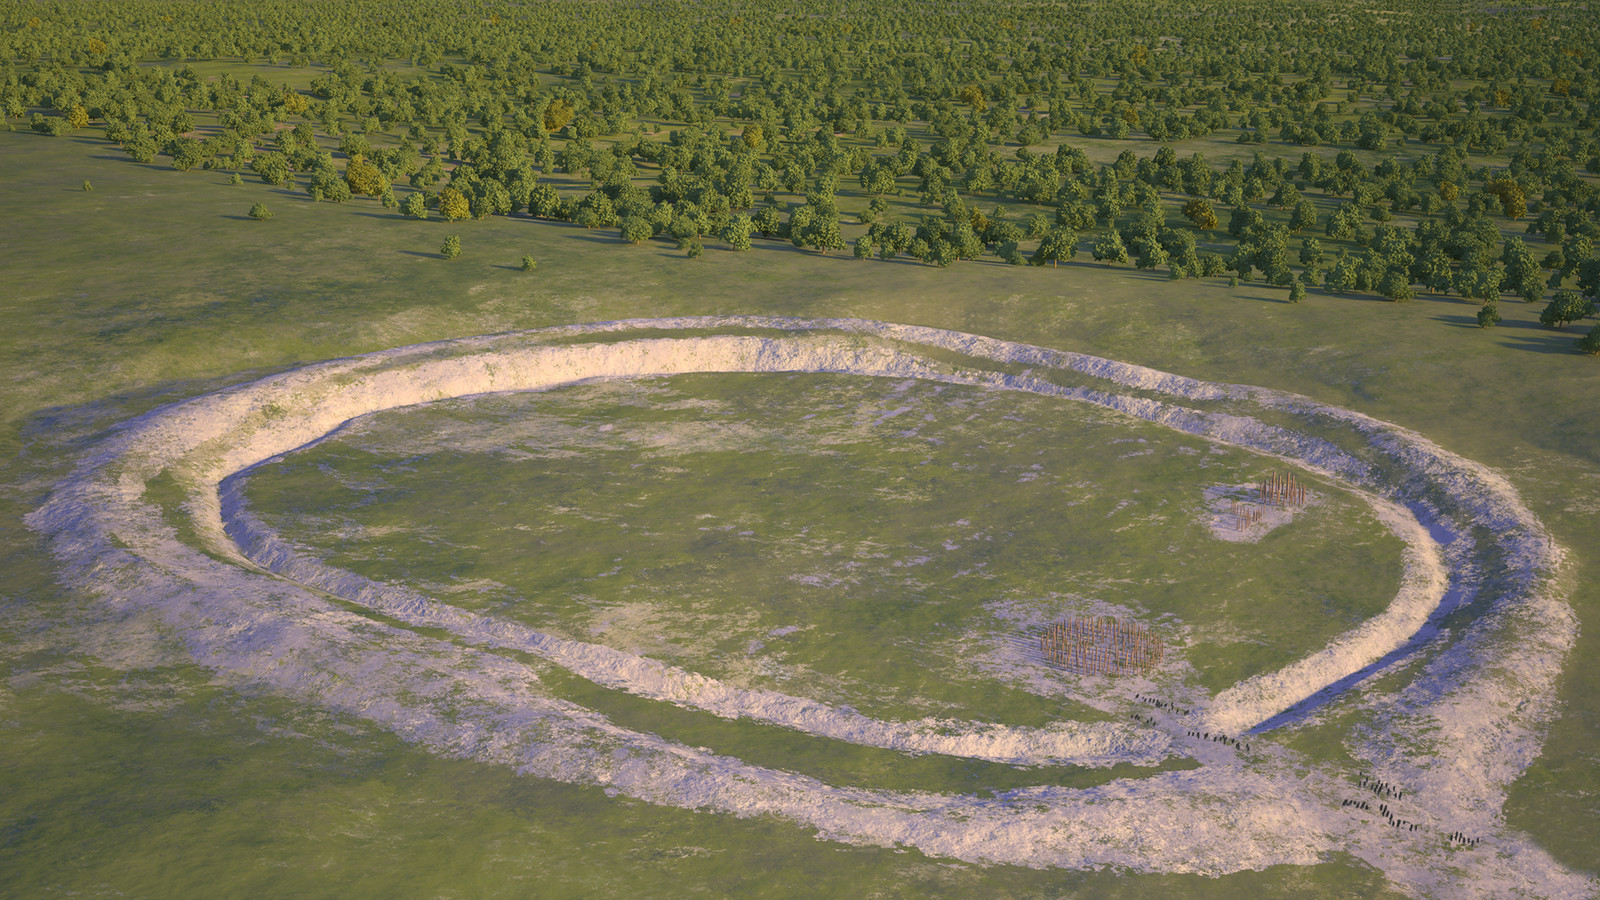 At its lastest phase, Durrington Walls was made into a circular enclosure. Its impressive earthwork includes a ditch and a rampart with a single entrance oriented towards the river Avon. Inside there were other smaller monuments and buildings.